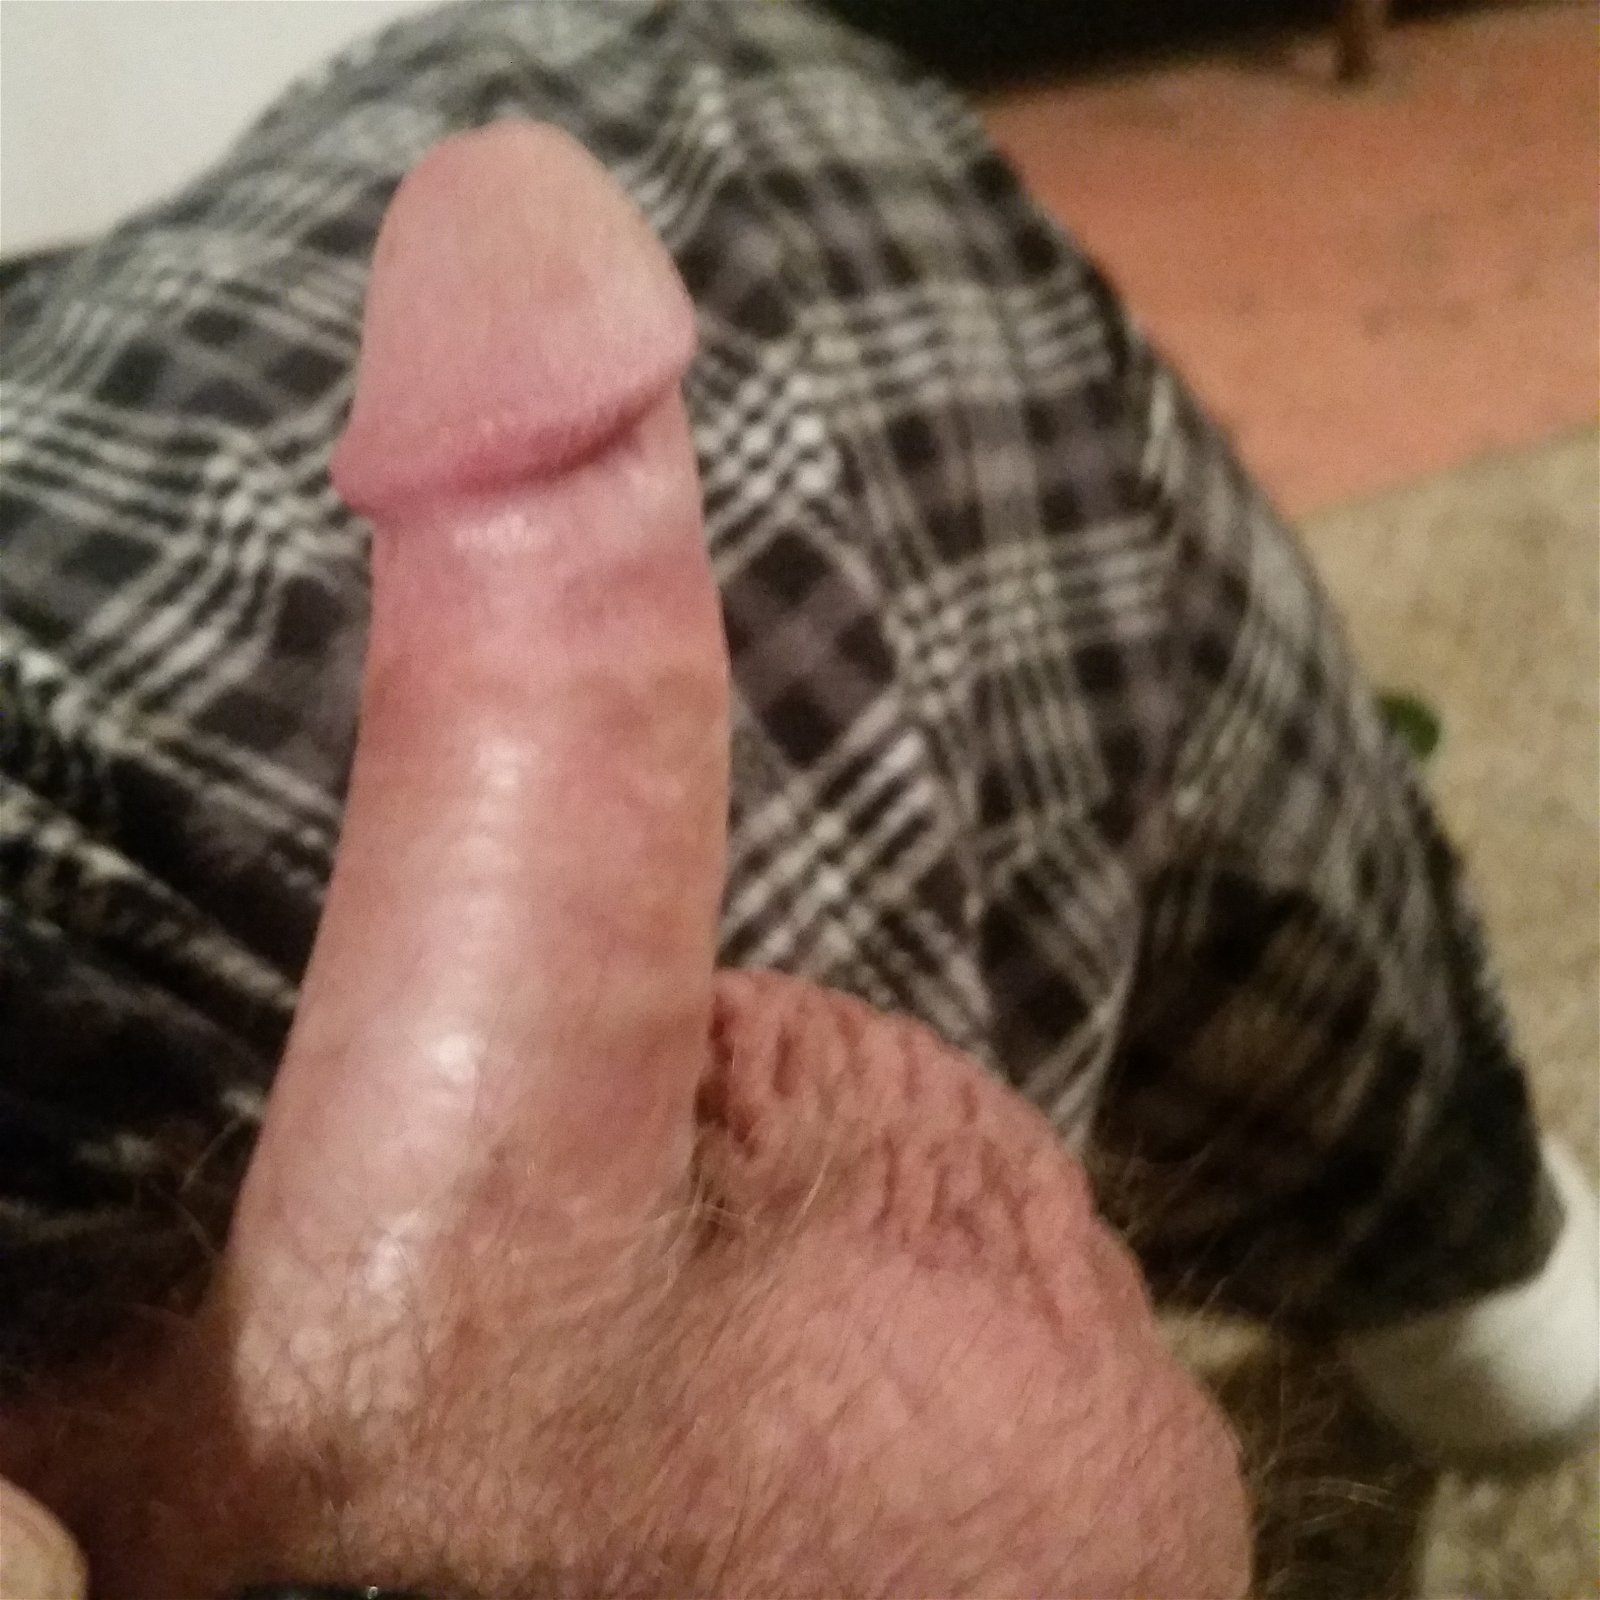 Photo by whiteyford6969 with the username @whiteyford6969, who is a verified user,  April 3, 2019 at 5:27 AM. The post is about the topic Small Cocks and the text says 'Been edging to @NaughtyMommy for hours!'